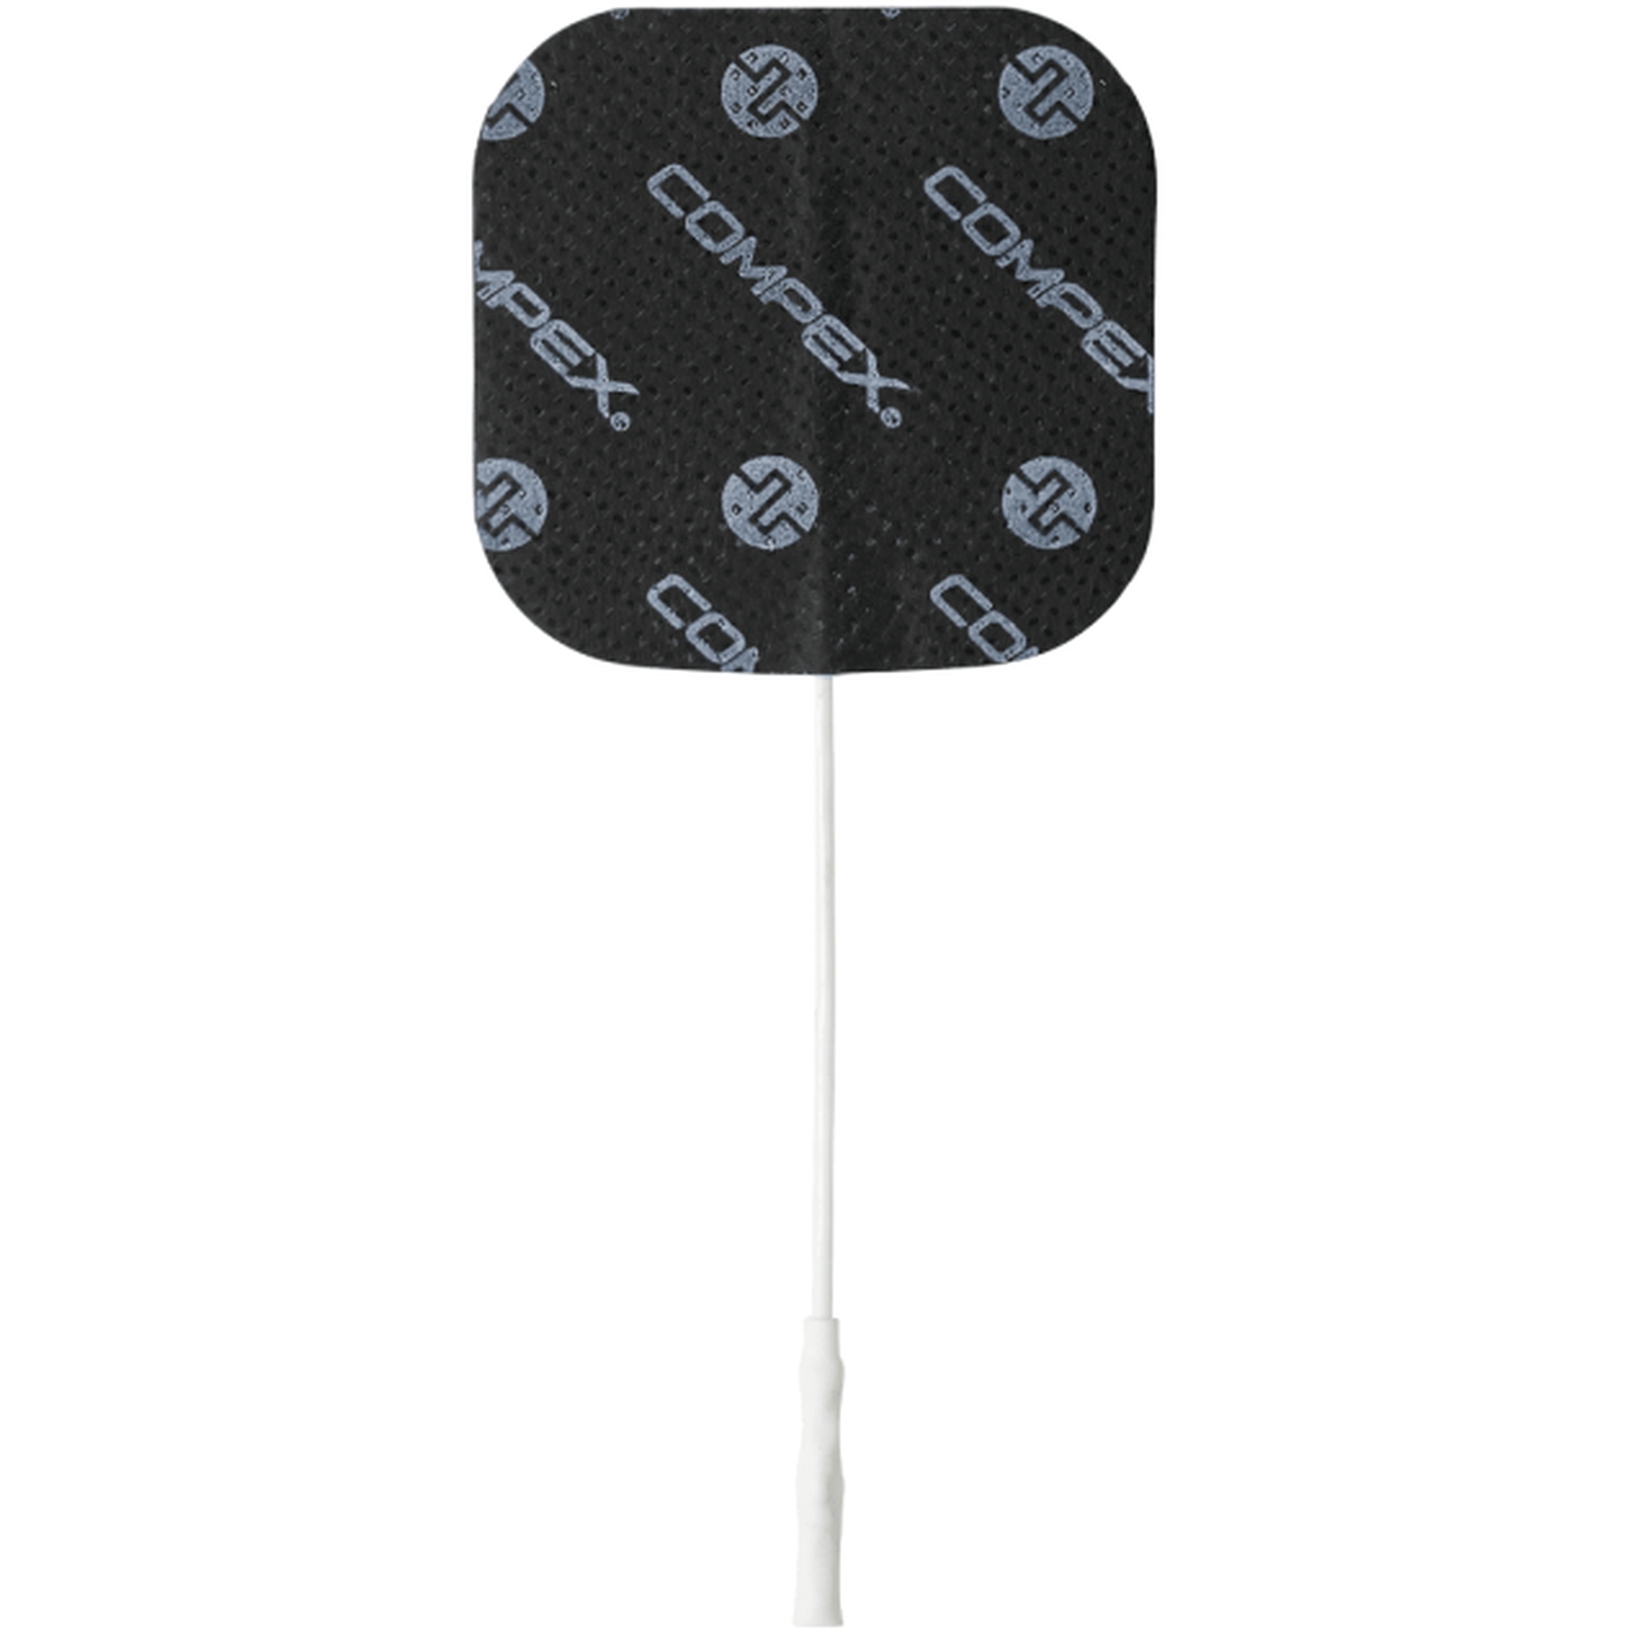 Picture of Compex Performance Electrodes 50 x 50mm Pin - 4pcs.